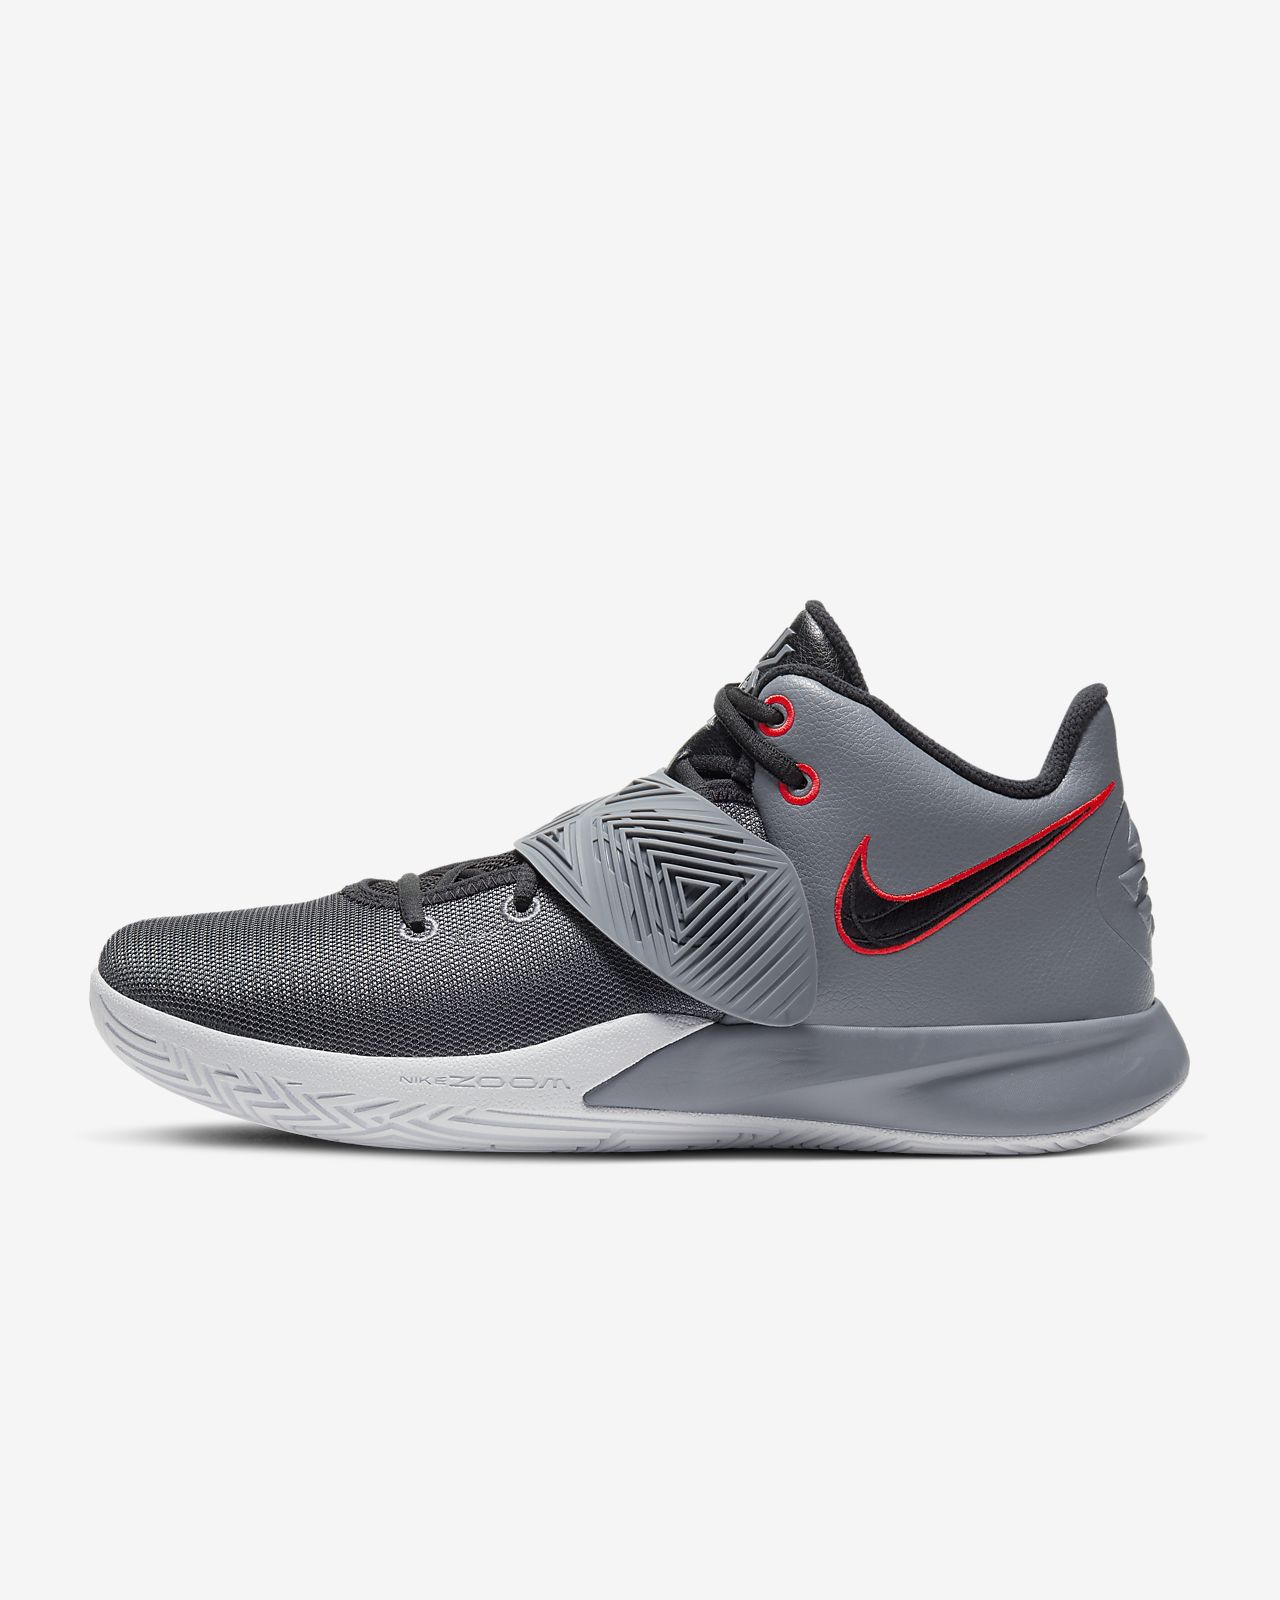 kyrie irving shoes 3